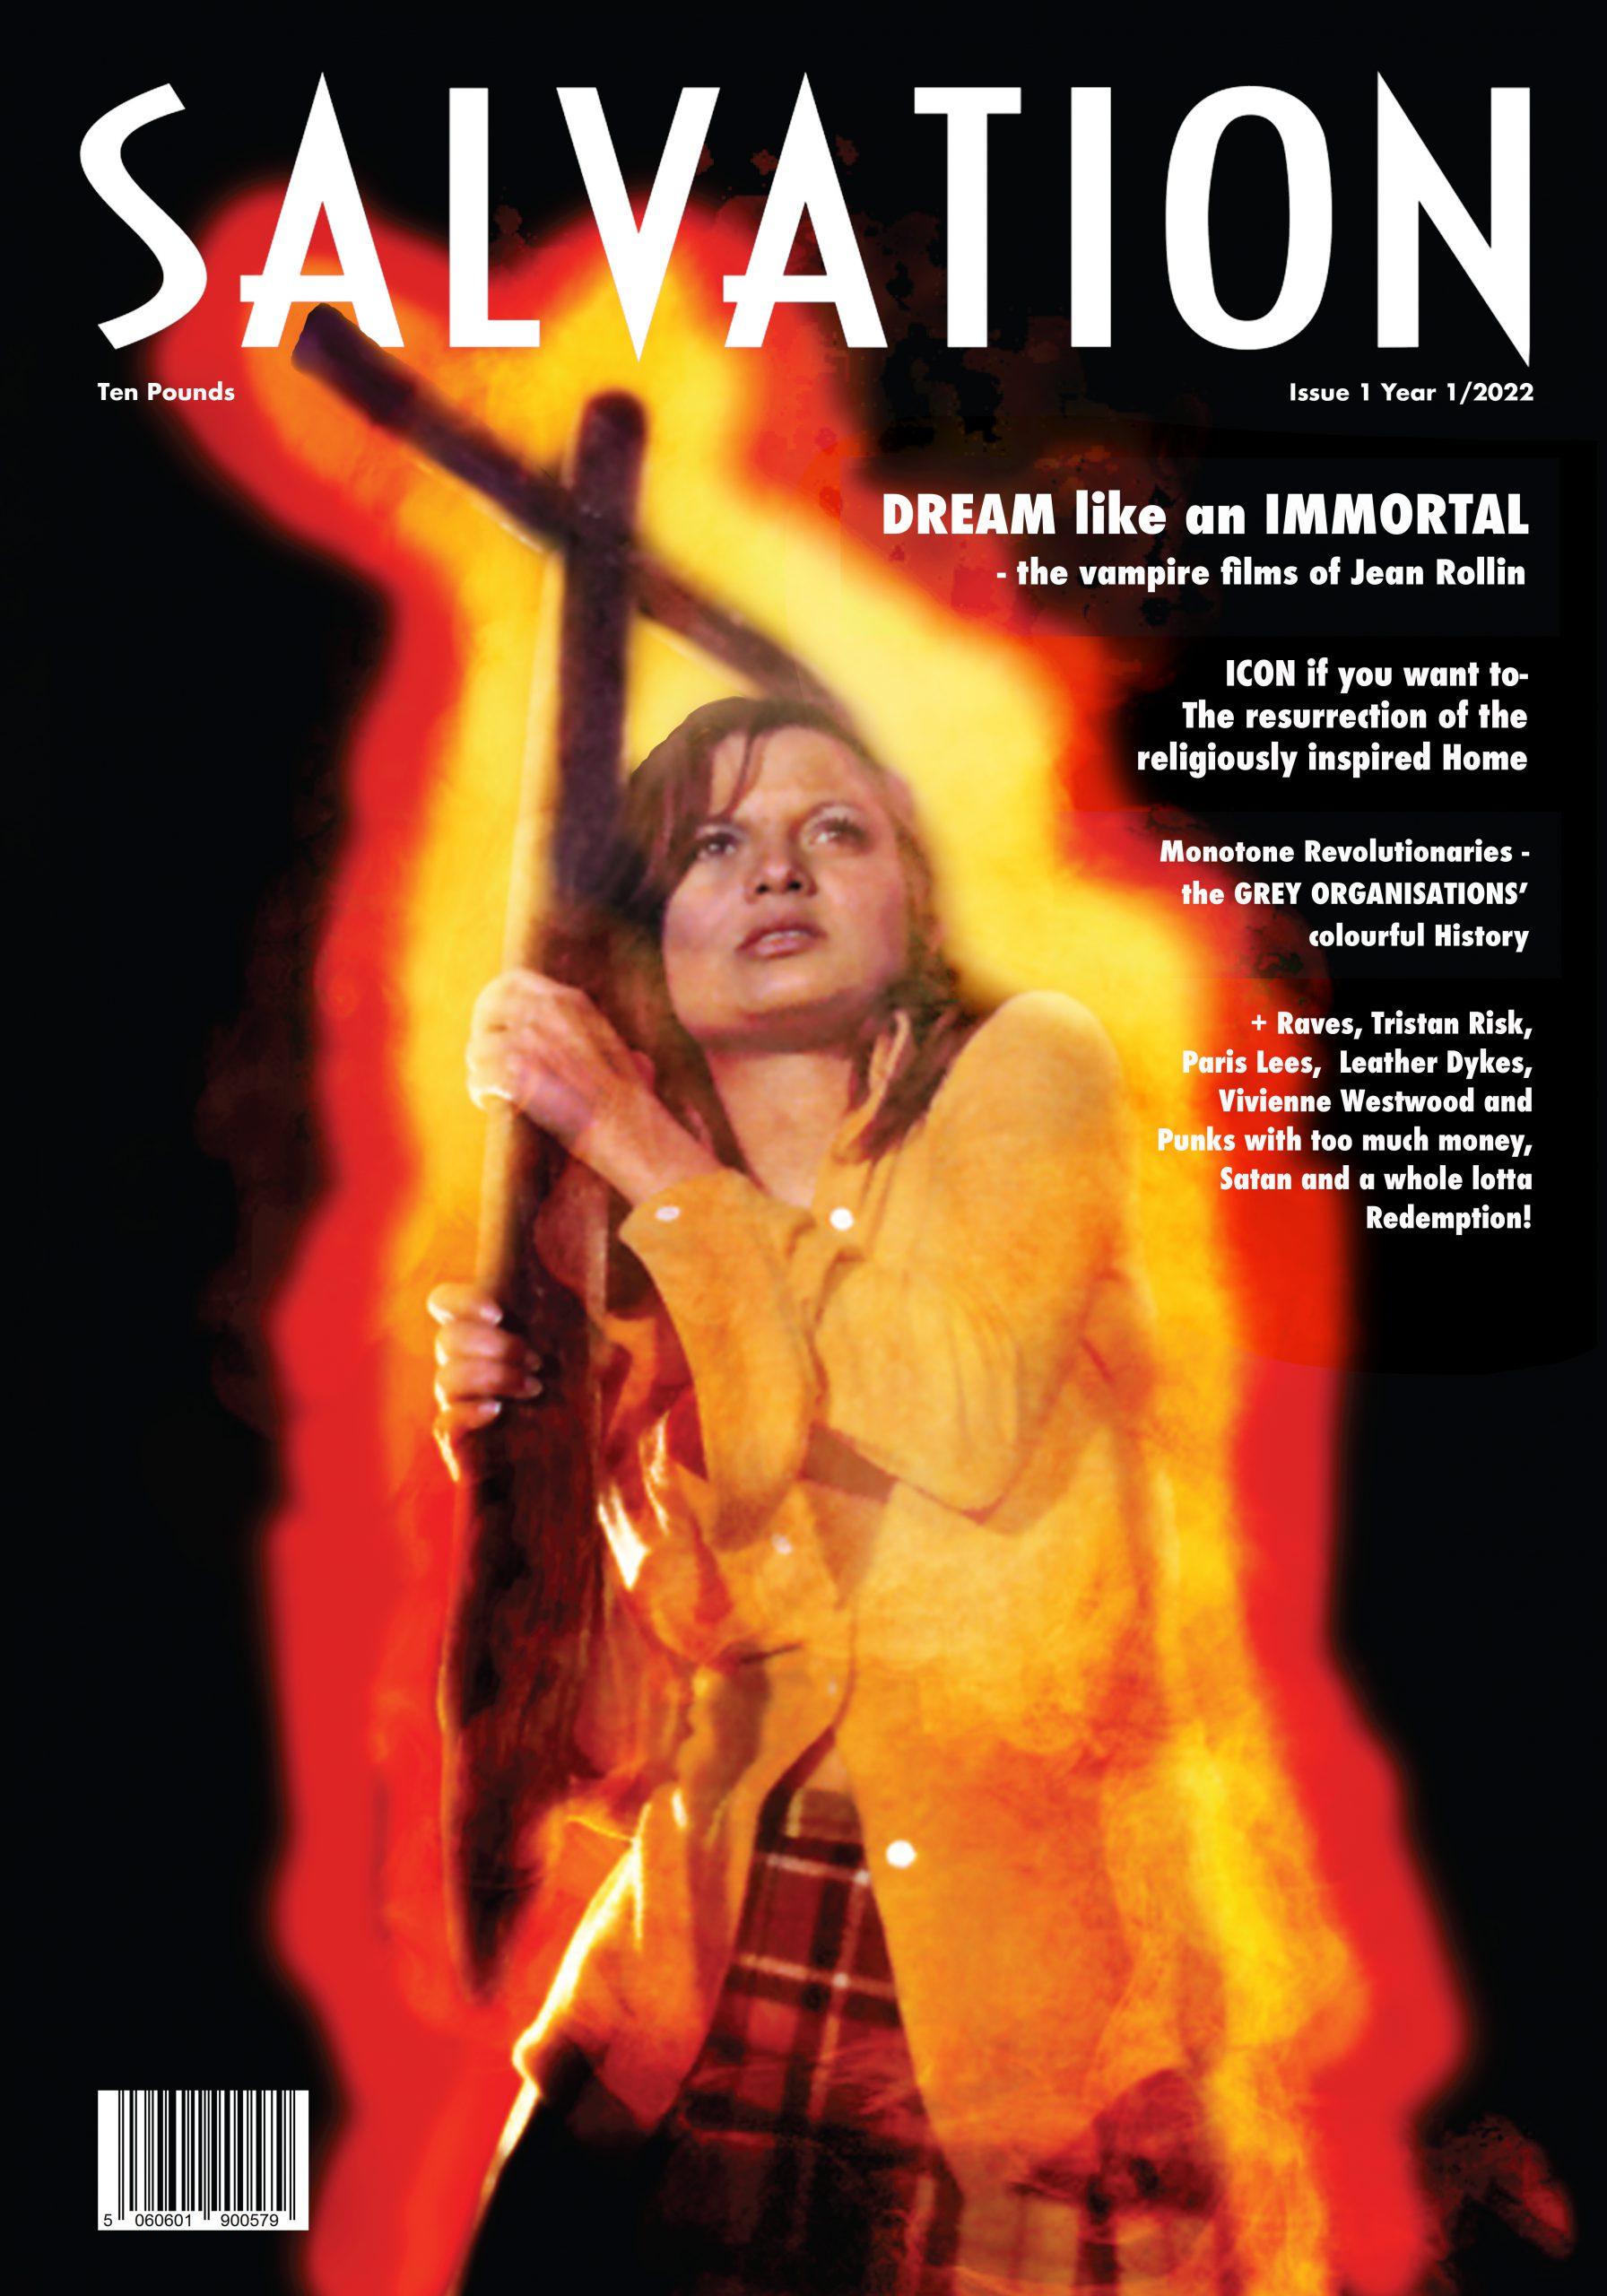 Cover of the Salvation Magazine Issue 01